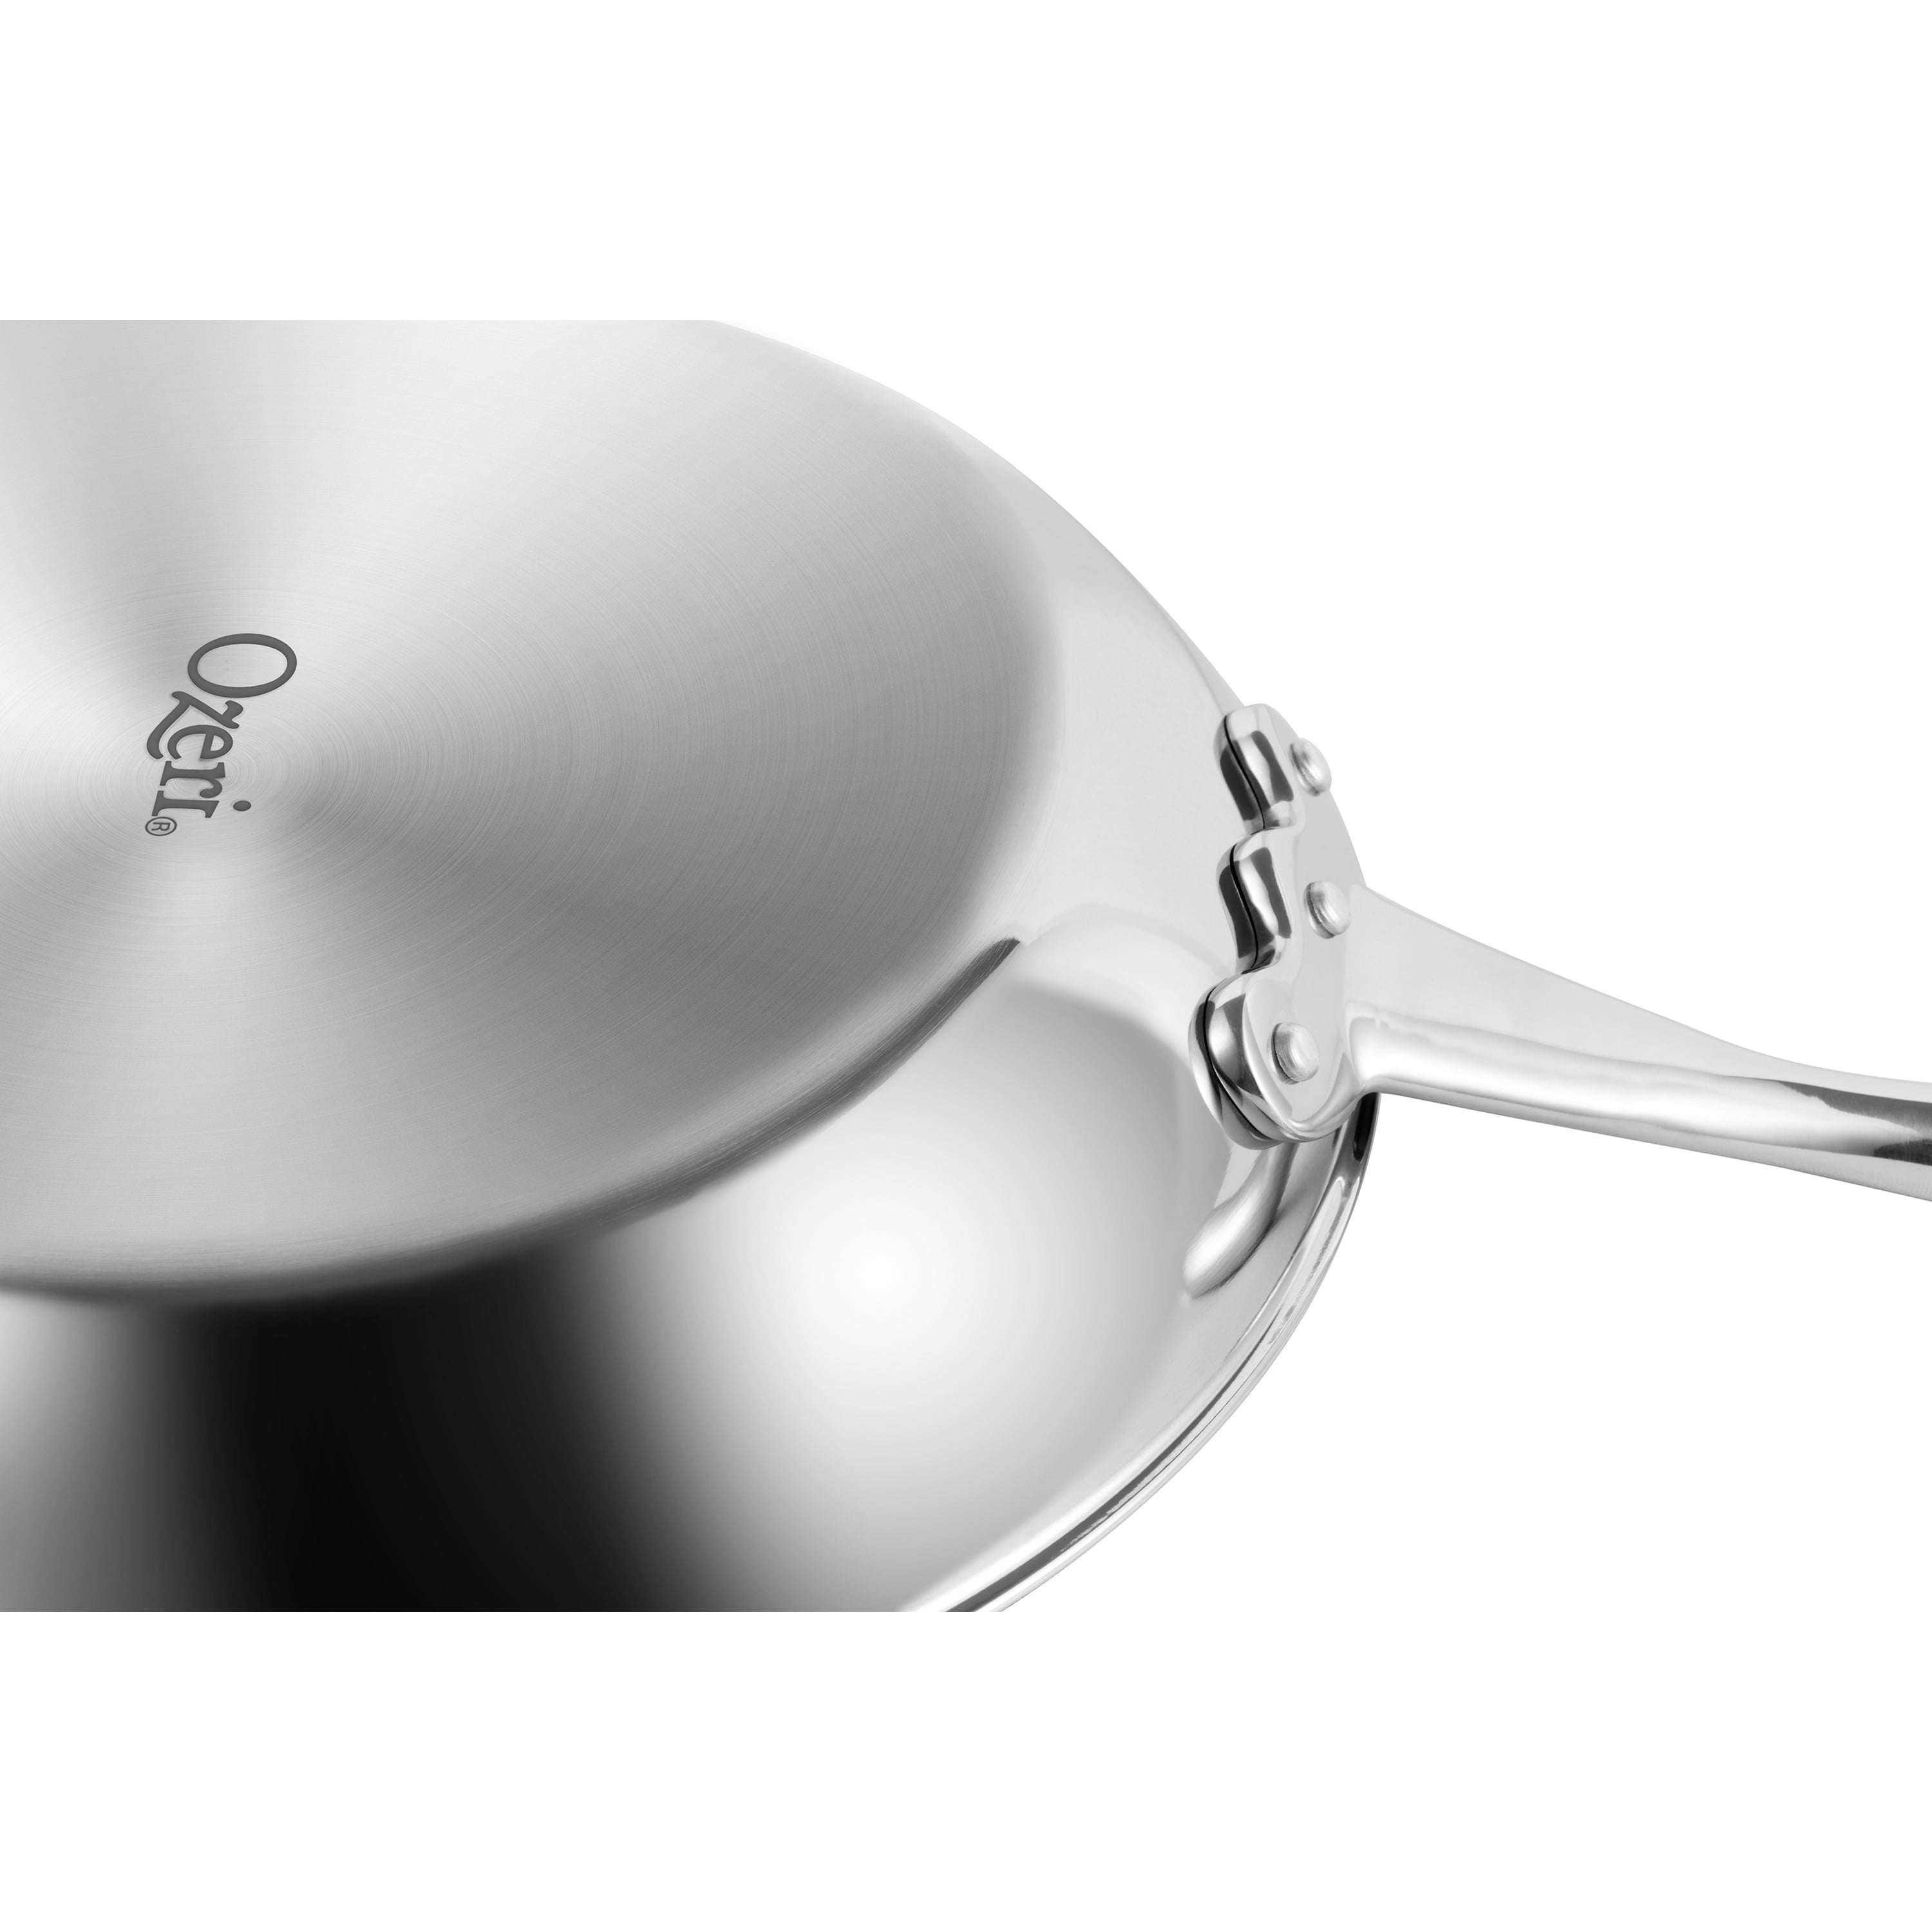 12 (30 cm) Stainless Steel Pan by Ozeri with ETERNA, a 100% PFOA and  APEO-Free Non-Stick Coating